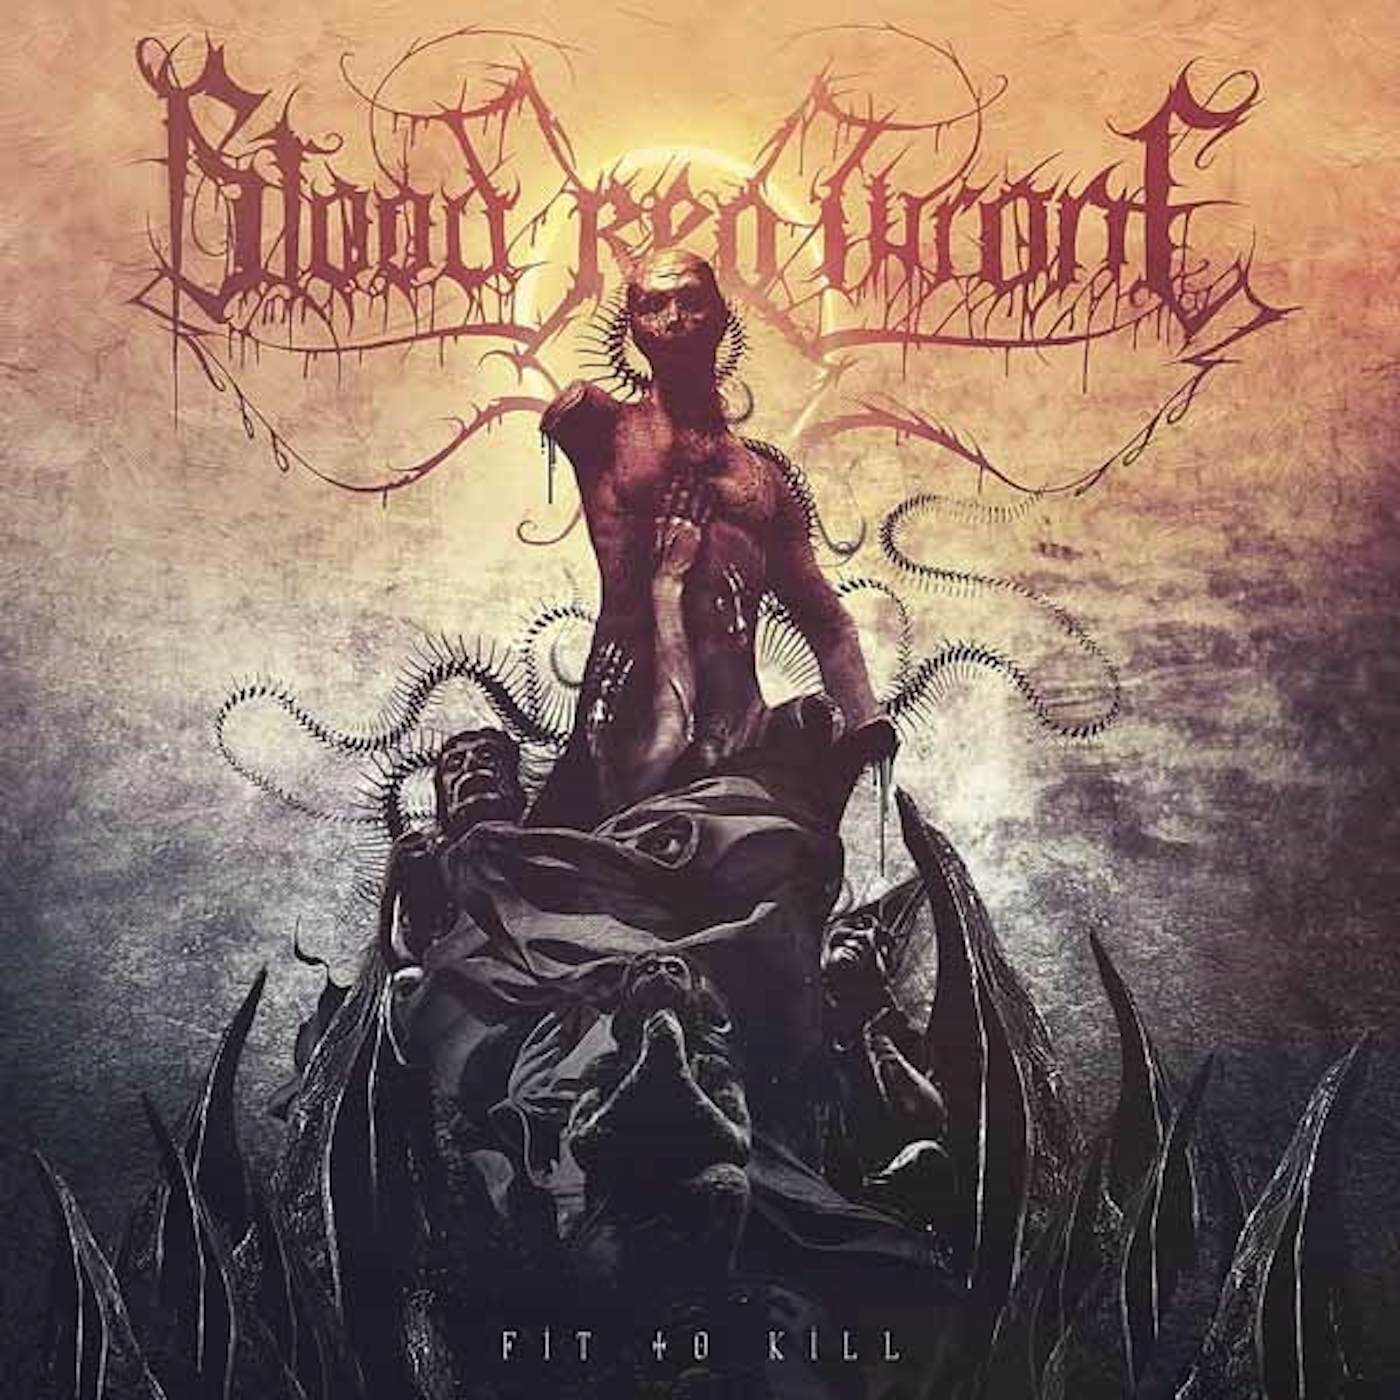 Blood Red Throne LP - Fit To Kill (Natural) (Vinyl)